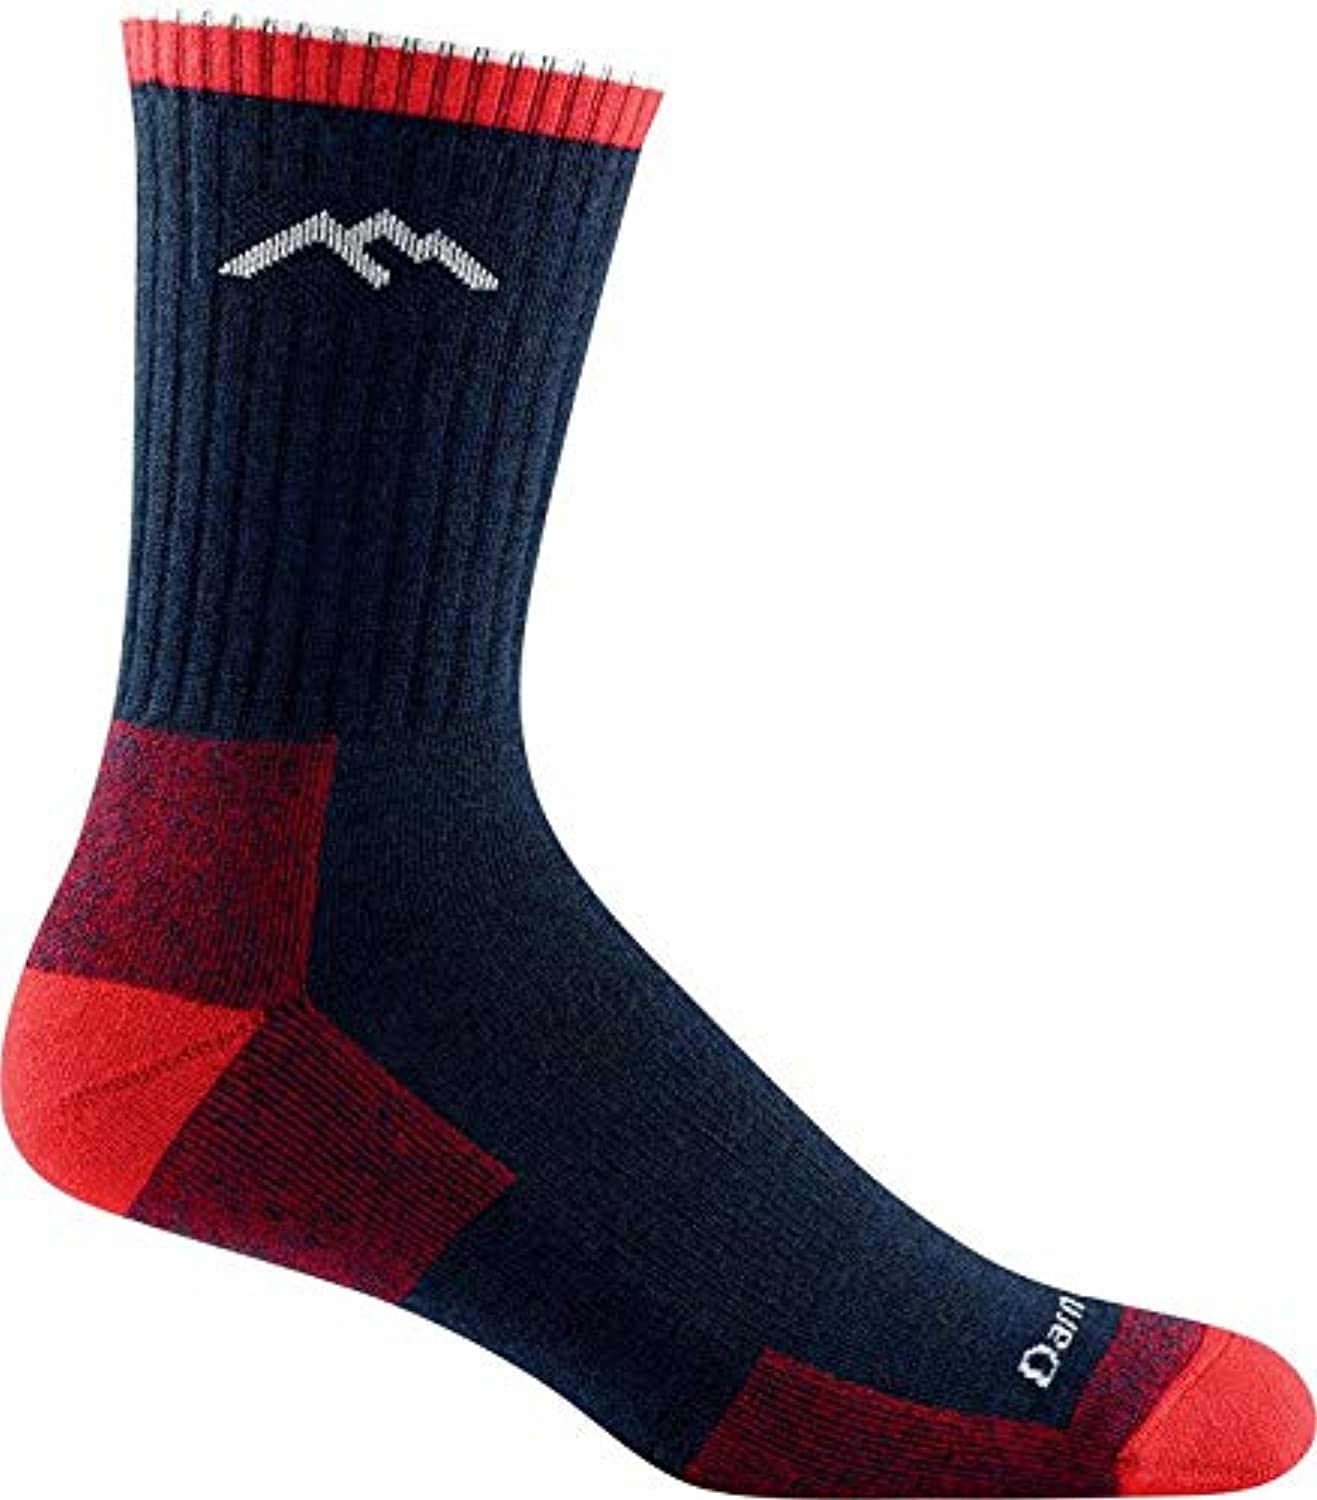 Men's Darn Tough Hiker Micro Crew Midweight with Cushion Sock in Eclipse